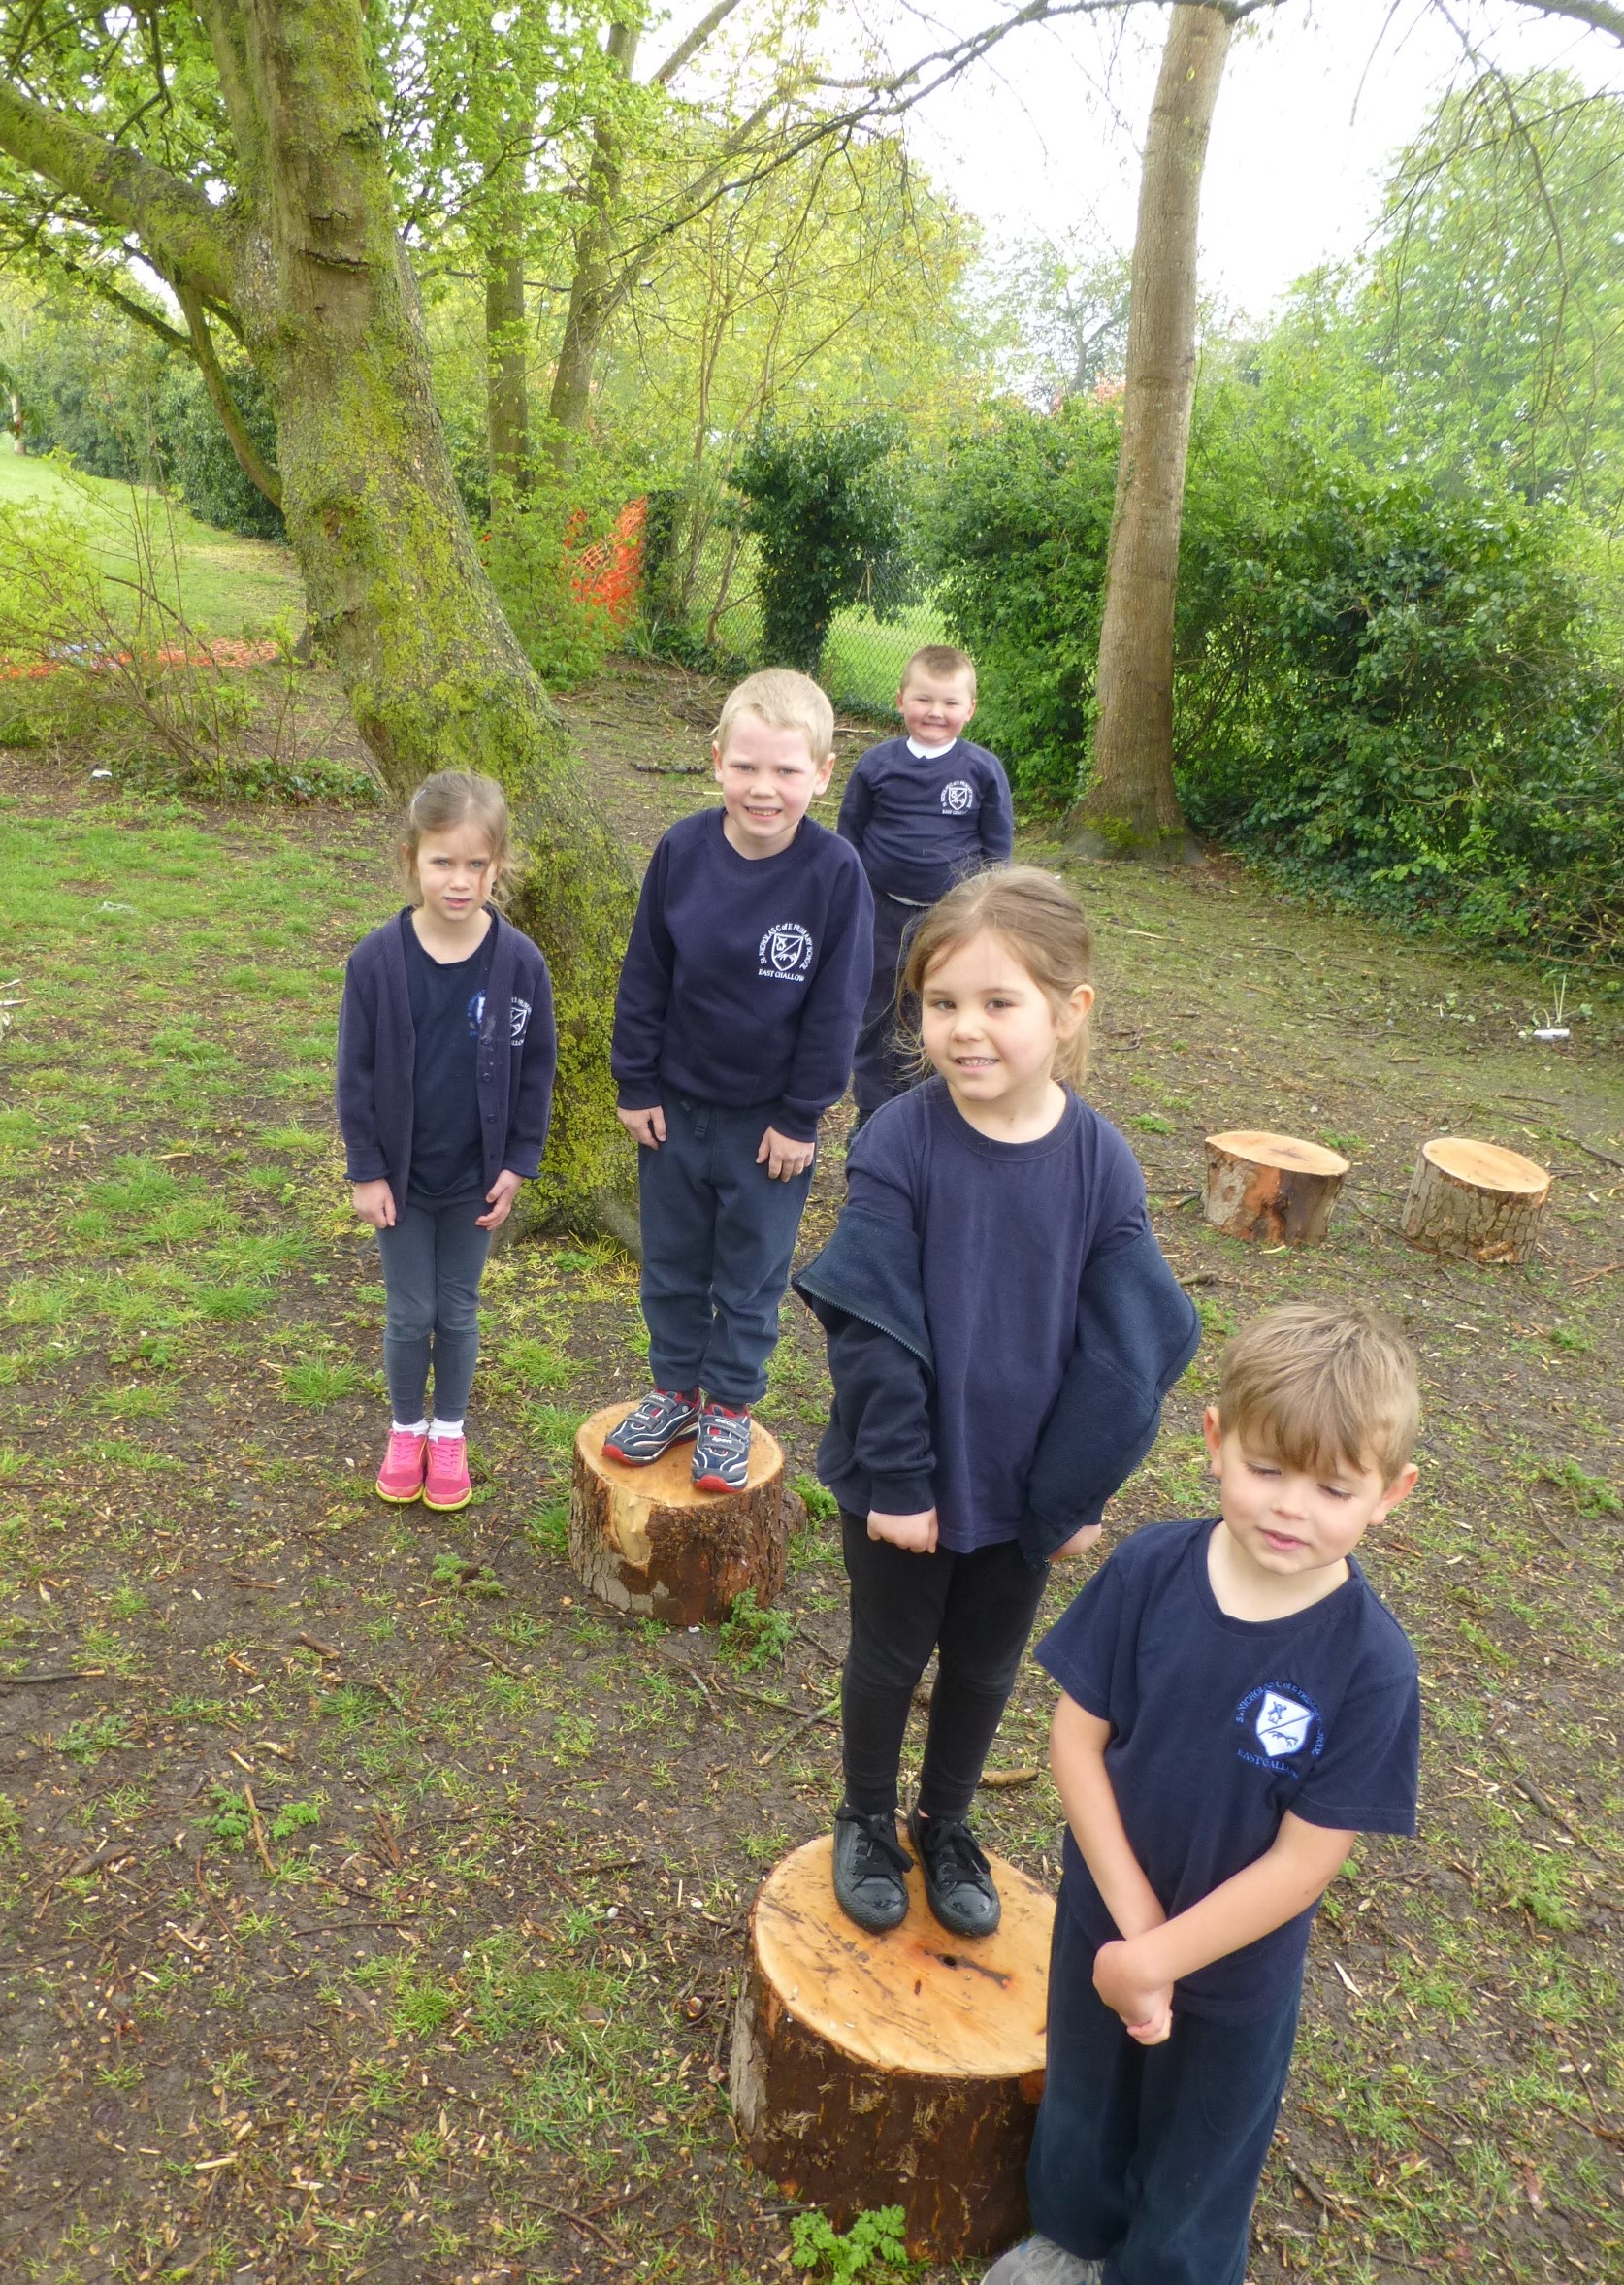 Pupils in the new forest school area